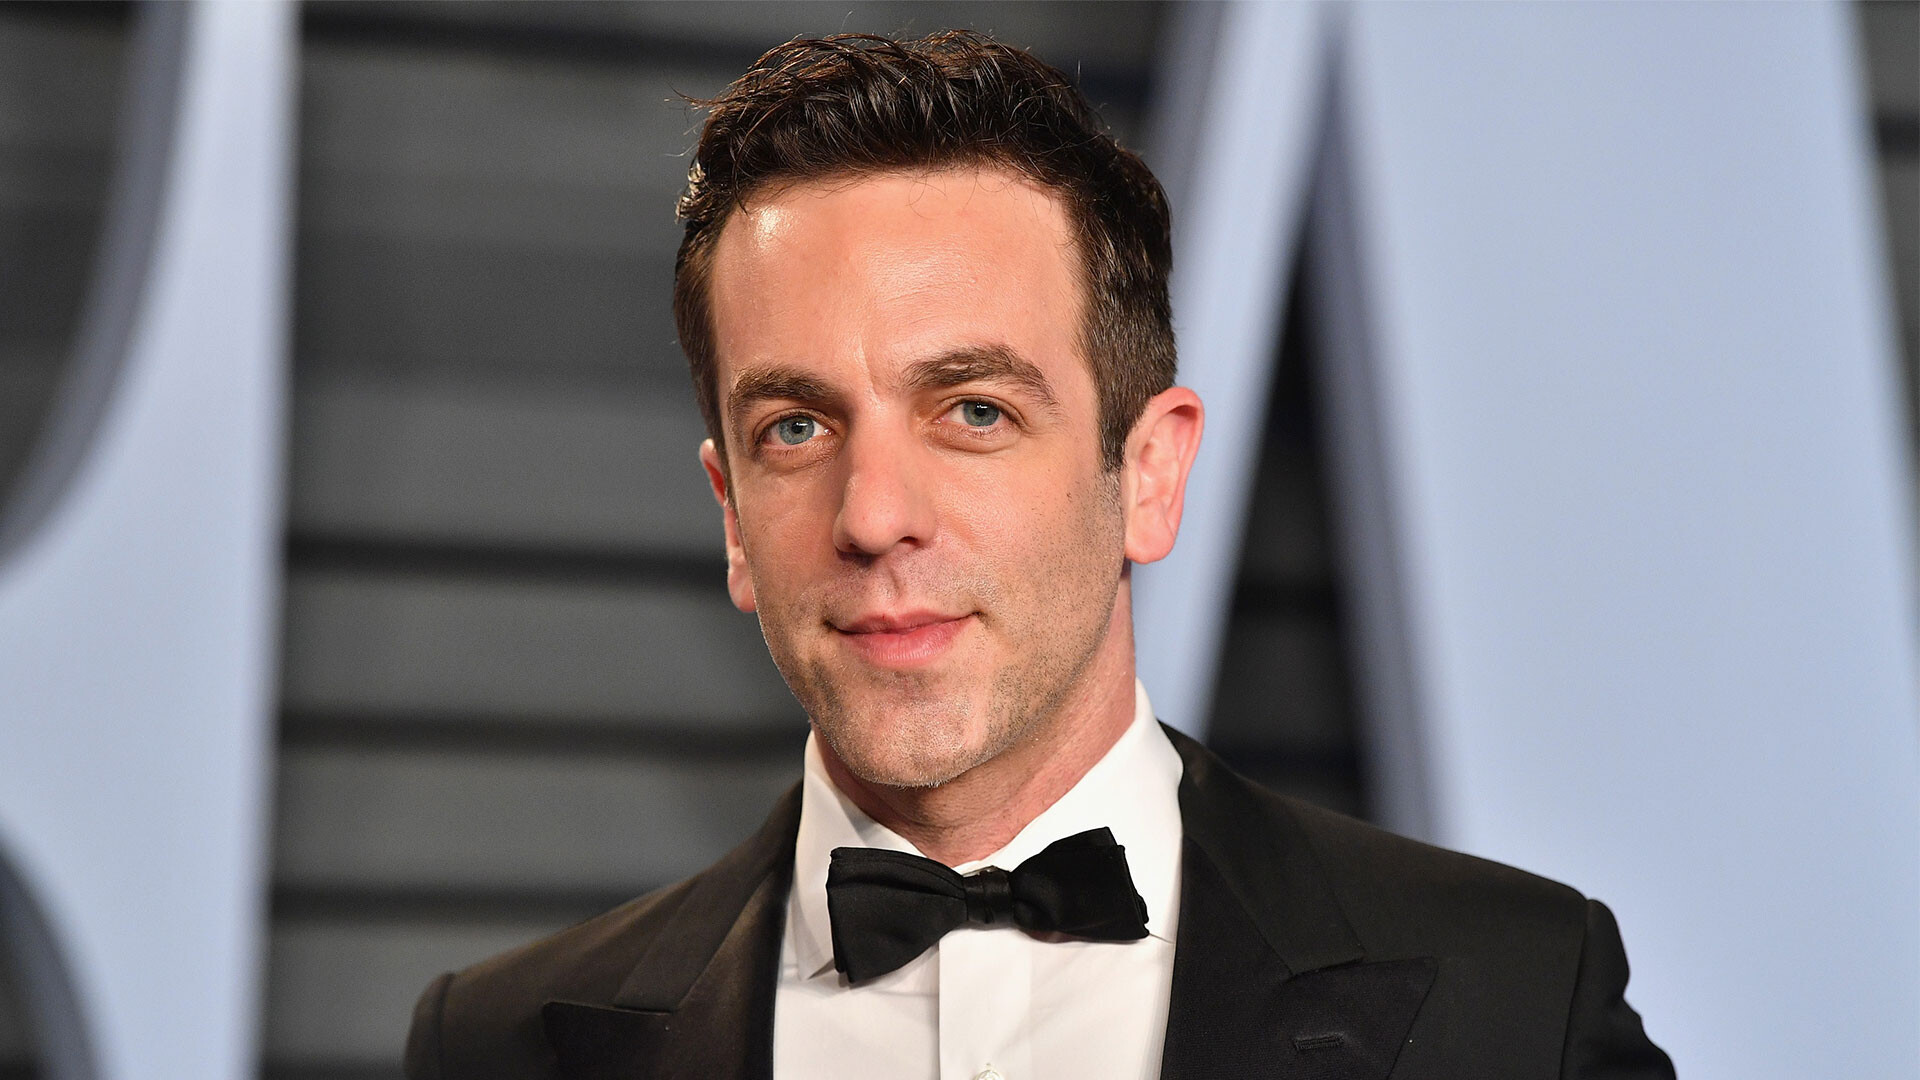 B.J. Novak: A well-known actor, writer and director spoke about the upcoming new project at the 2018 Vanity Fair Oscar Party in Beverly Hills. 1920x1080 Full HD Wallpaper.